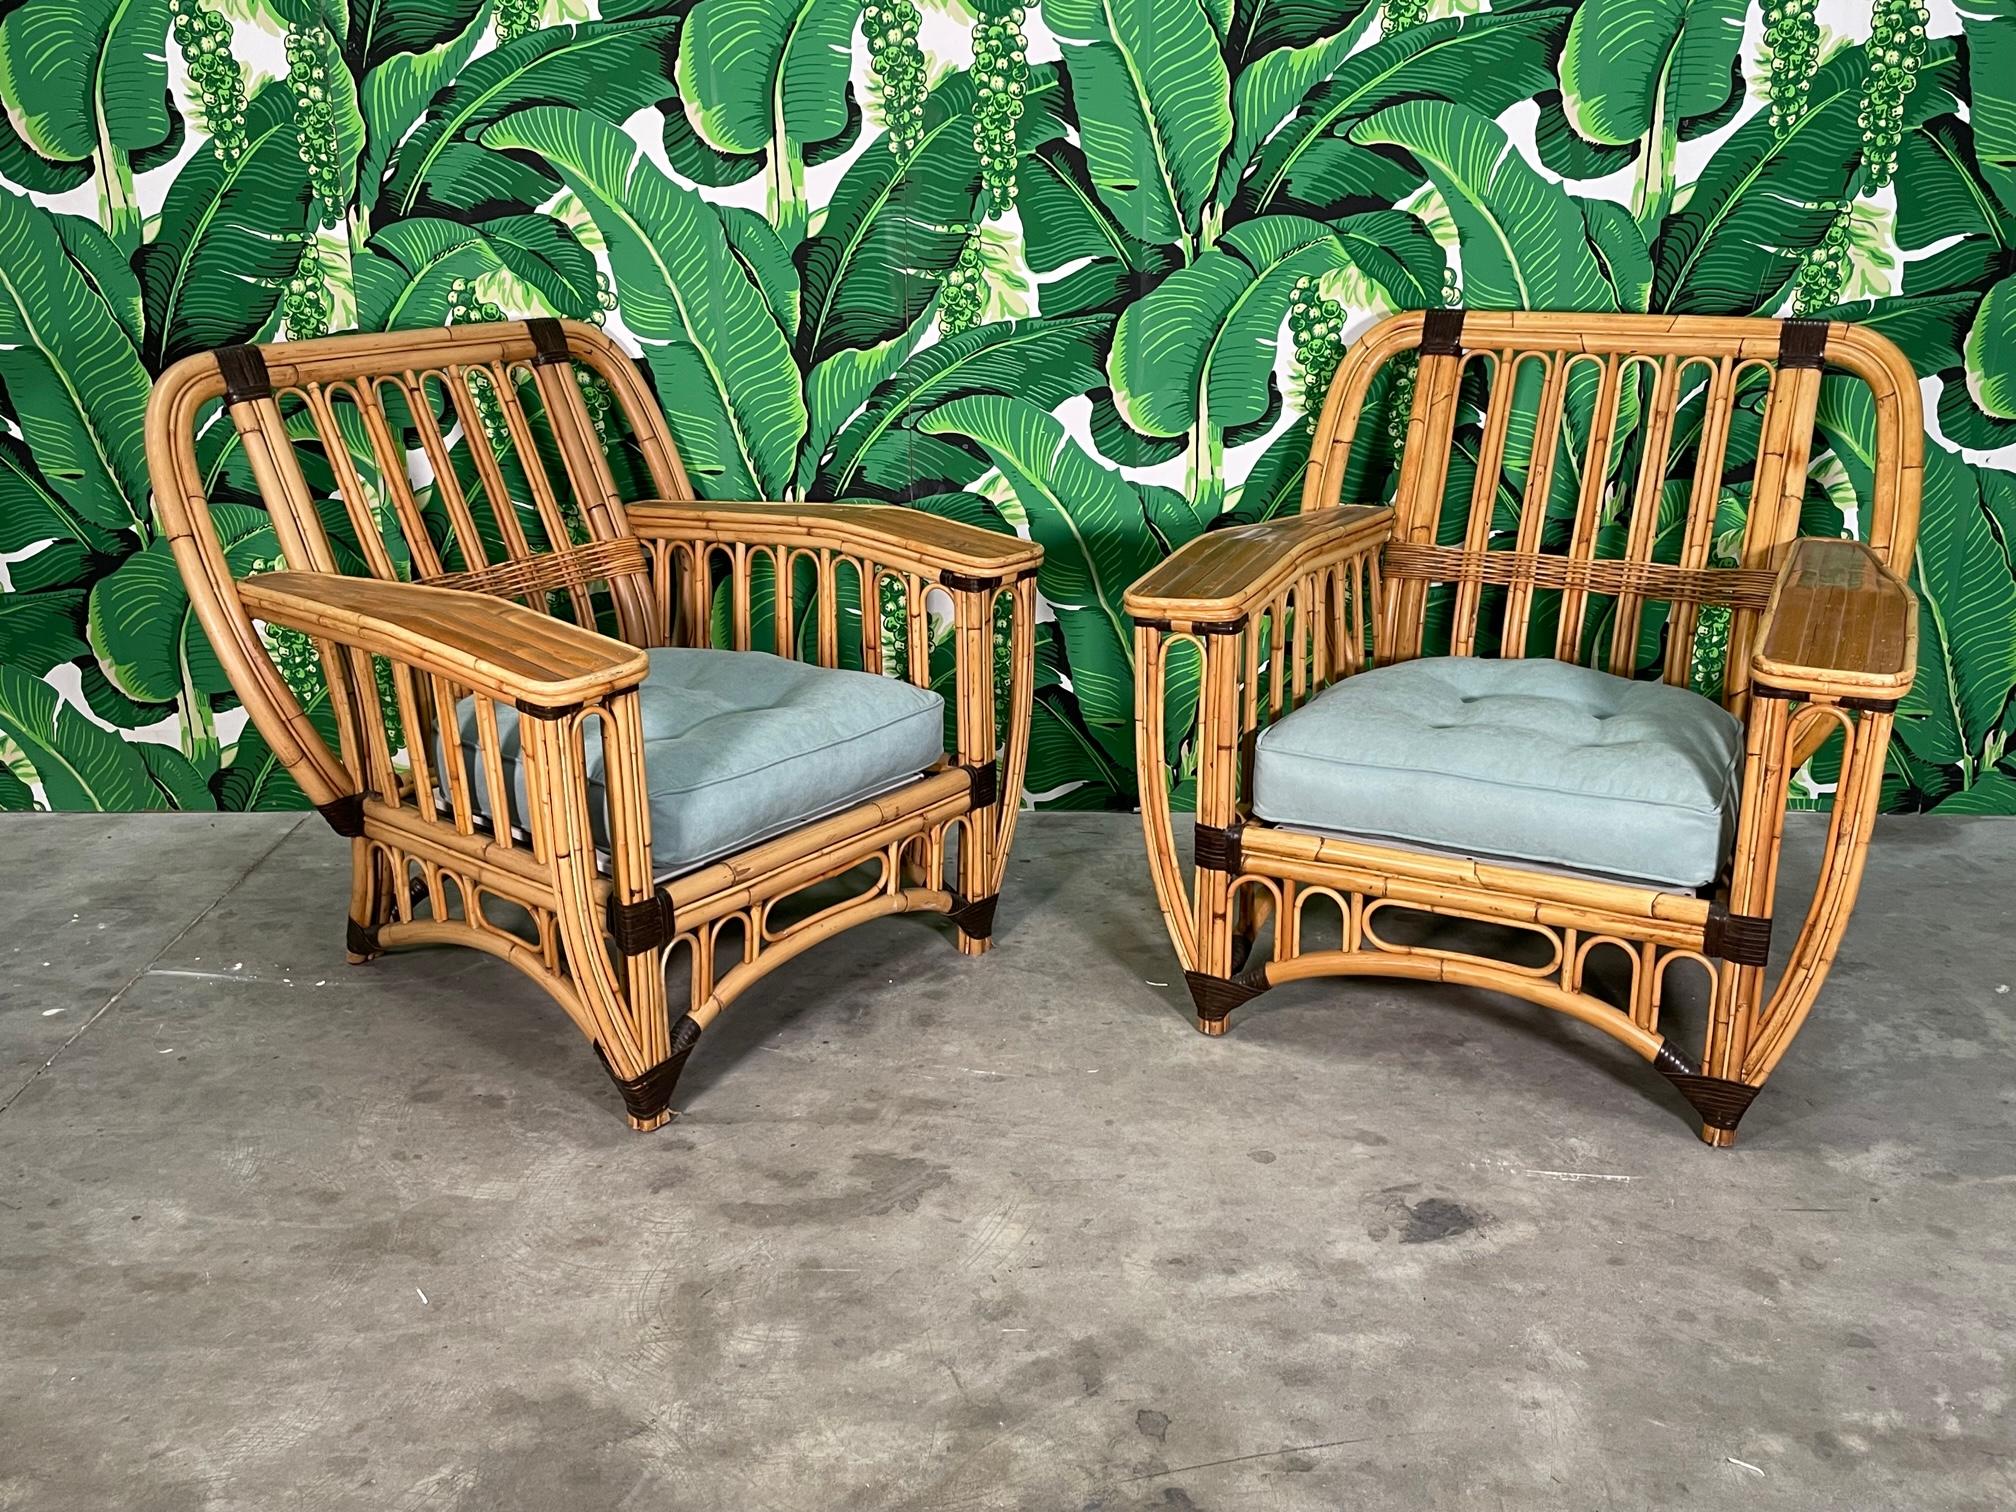 Pair of large rattan club chairs feature two tone design and split reed veneered arms. Extremely comfortable. Good condition with imperfections consistent with age. May exhibit scuffs, marks, or wear, see photos for details. We also have matching